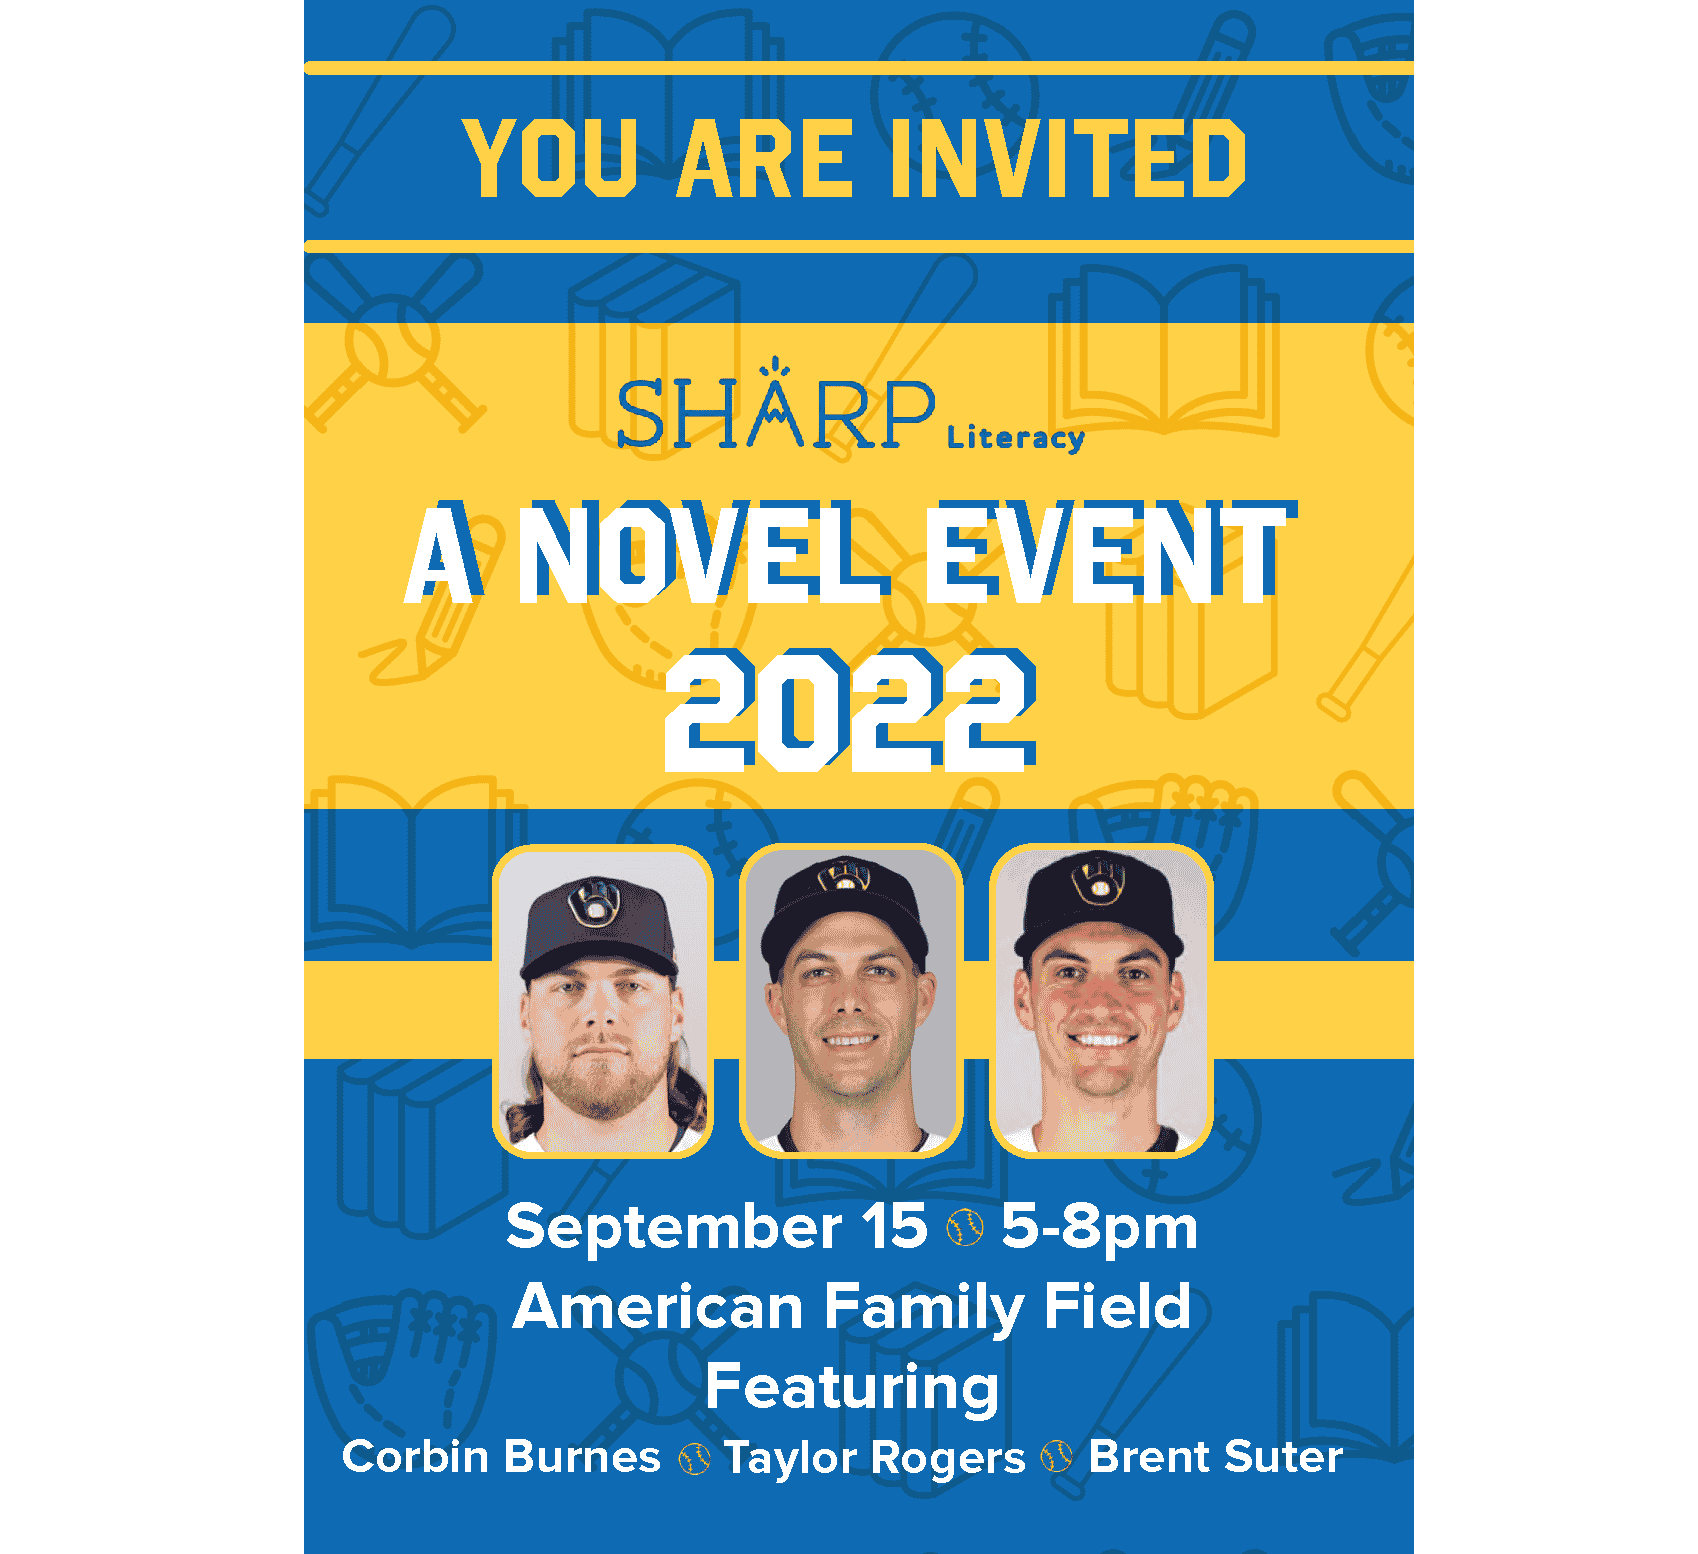 A pitcher, an author, and a Novel Event - WTMJ